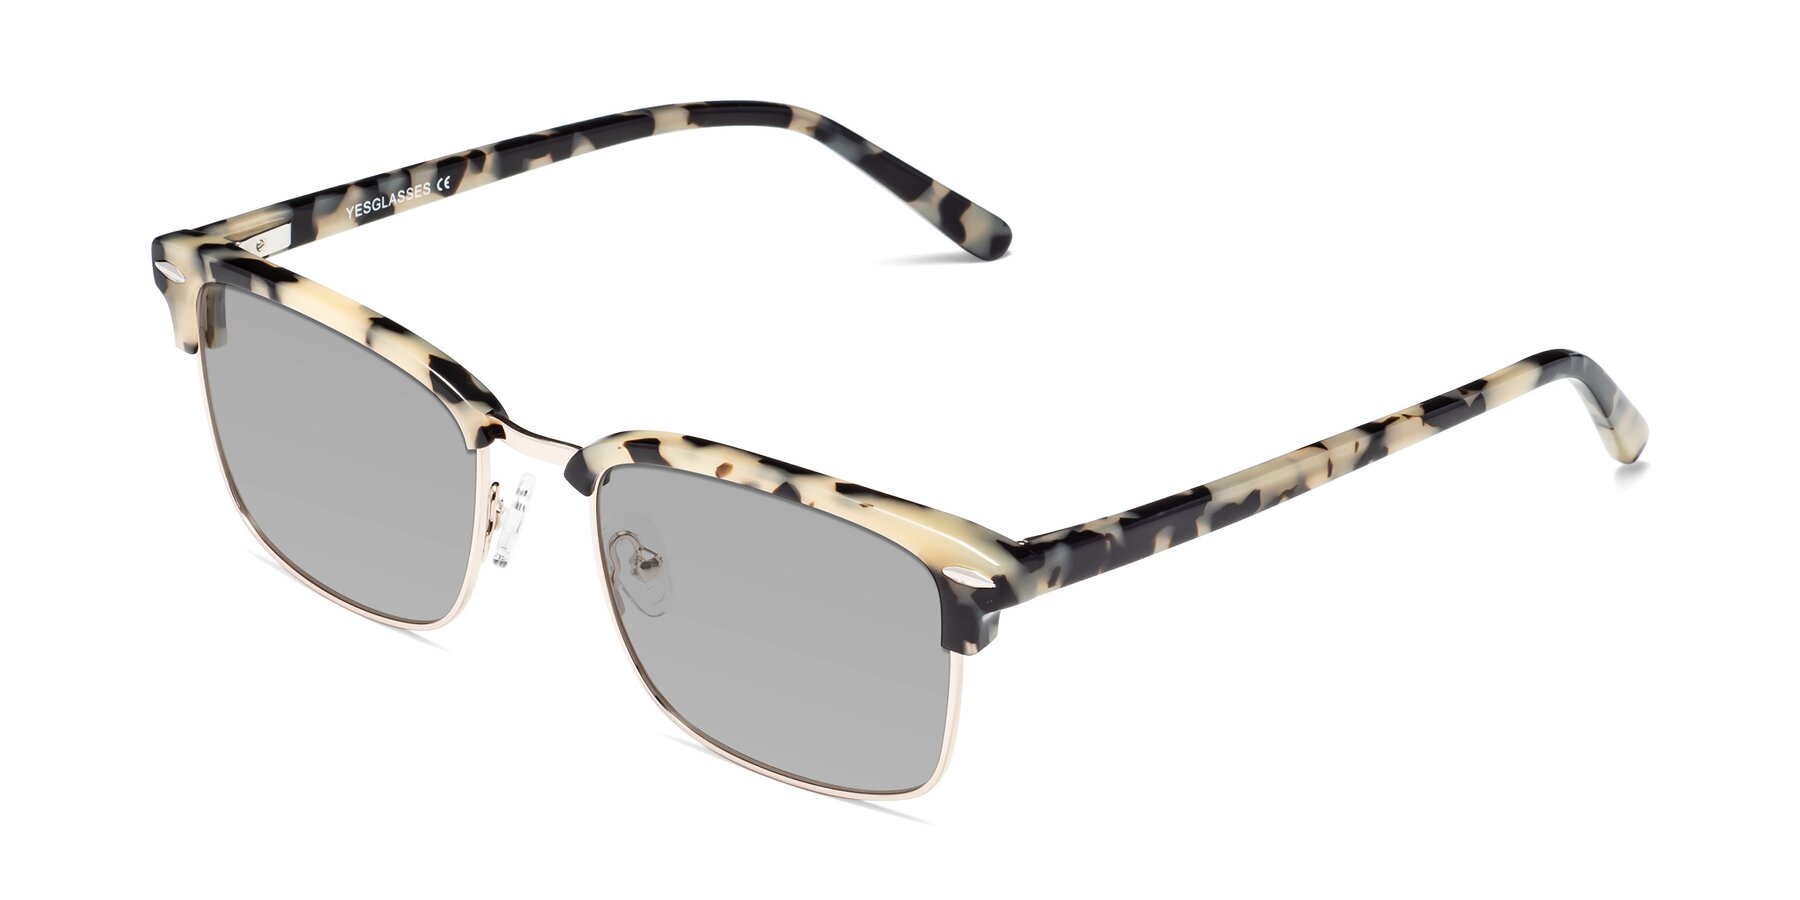 Angle of 17464 in Tortoise-Gold with Light Gray Tinted Lenses